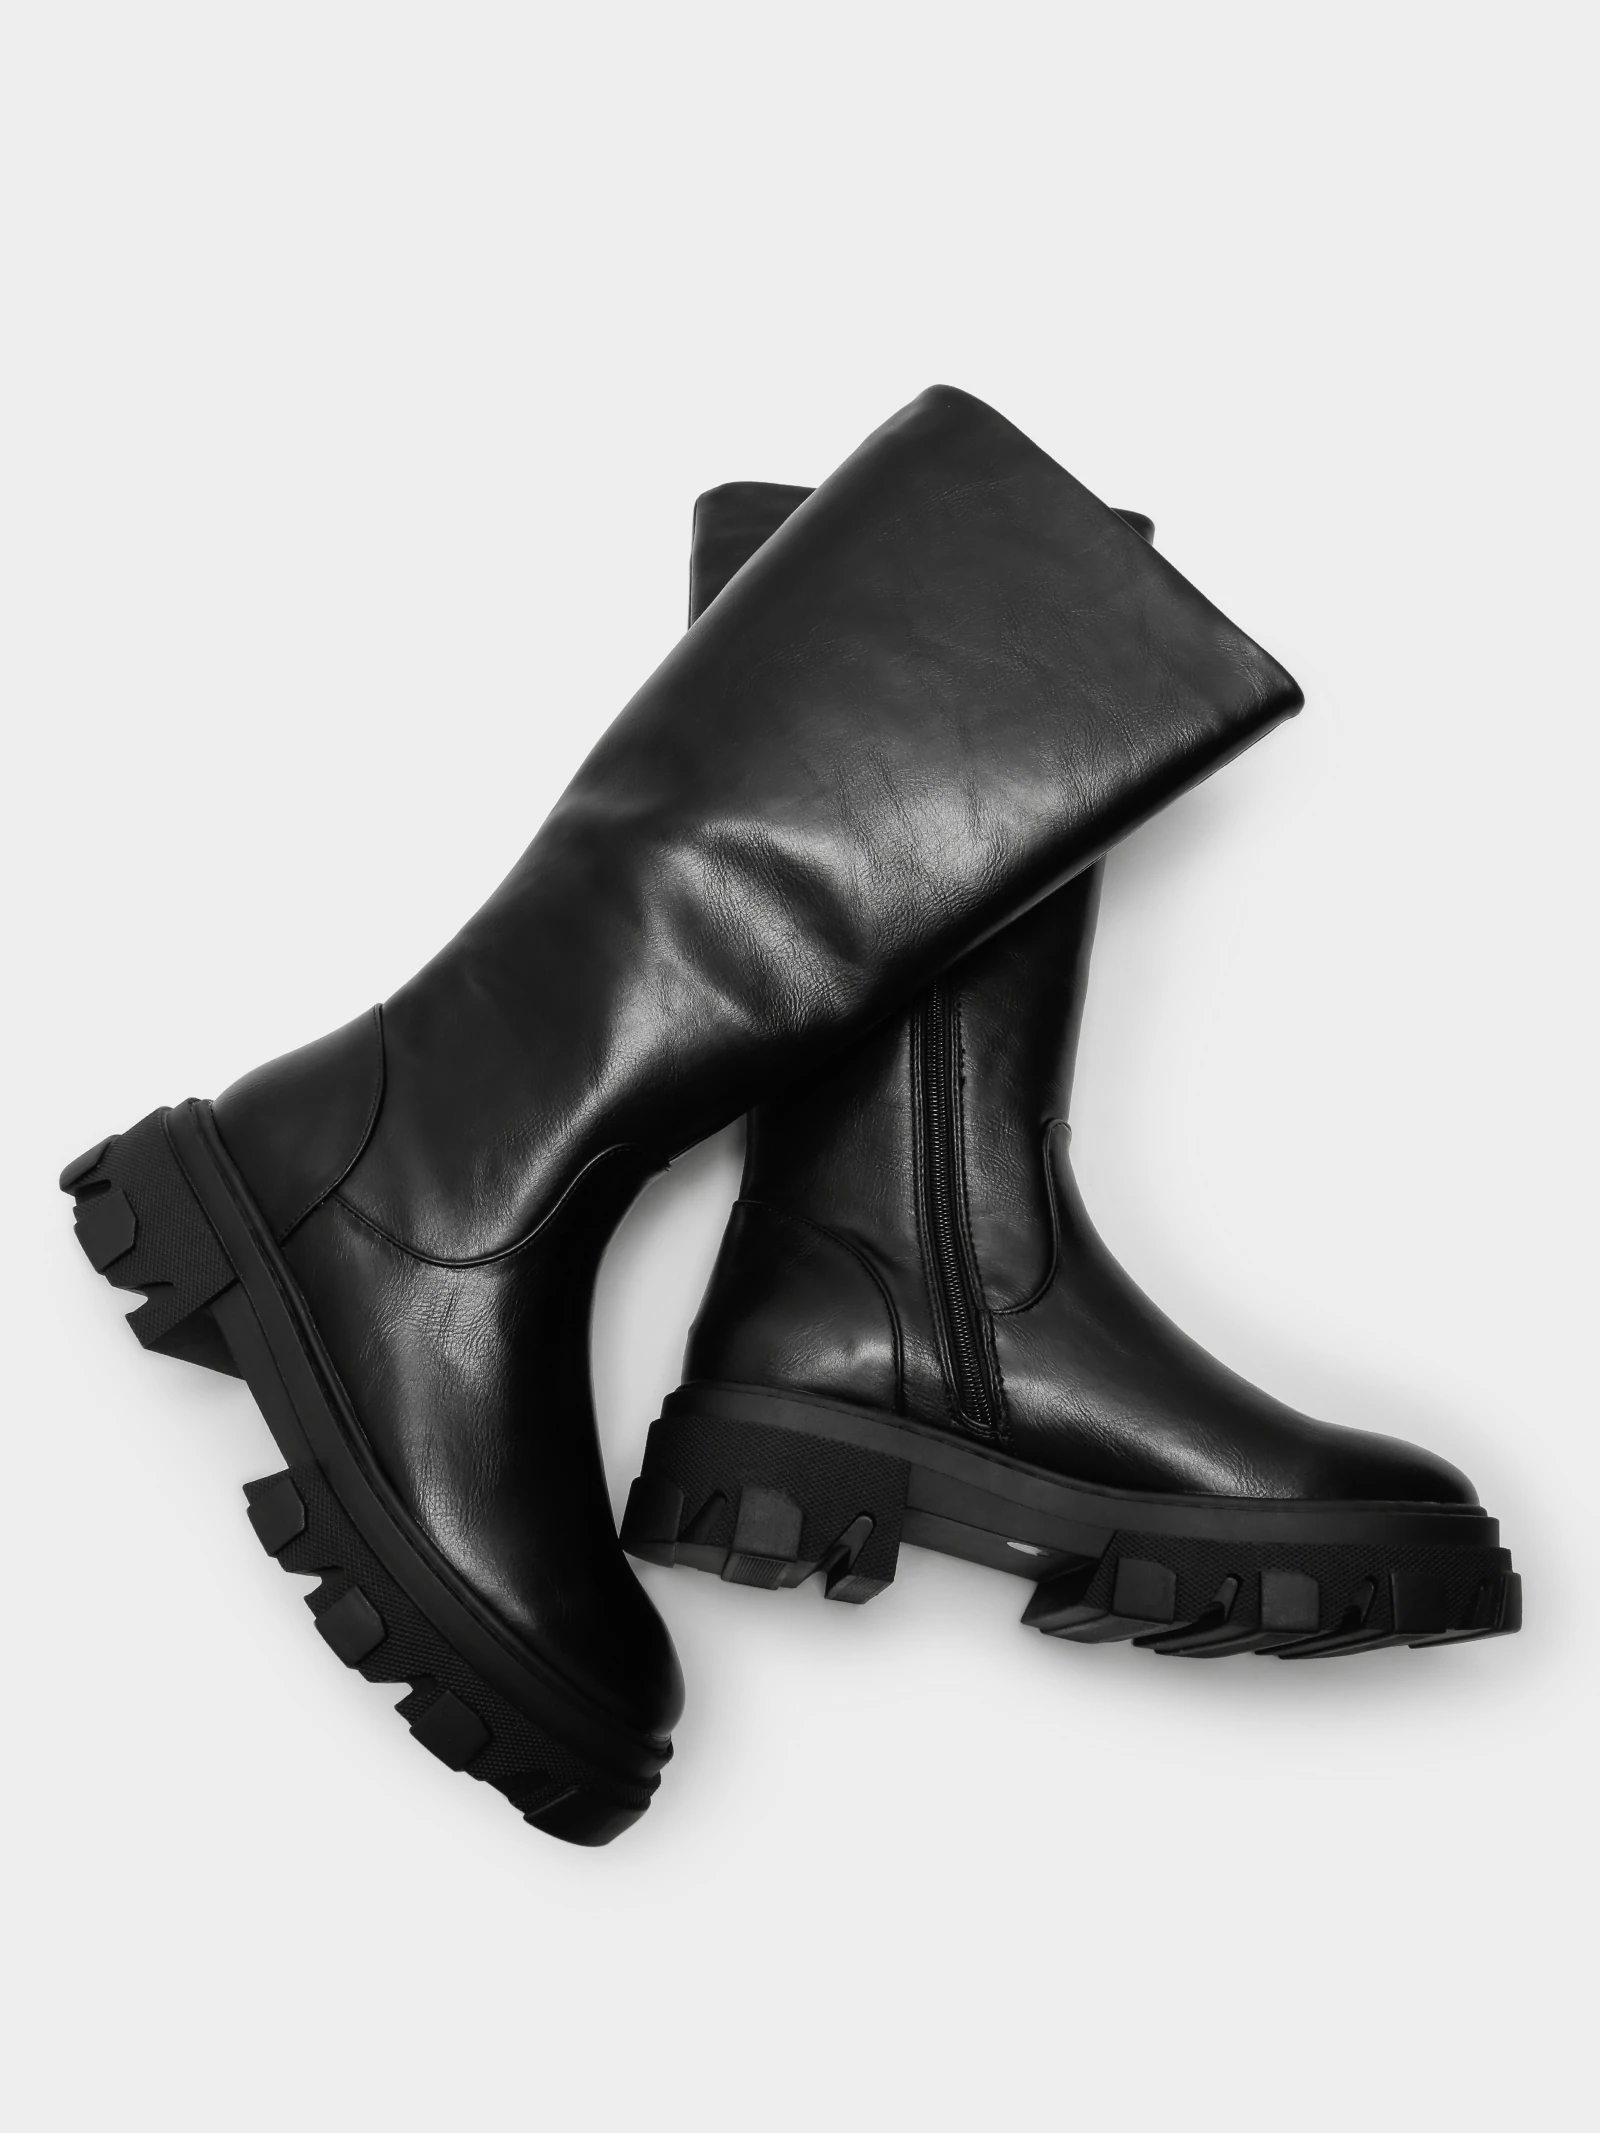 GLUE - Womens Andes Boots in Black $119.95